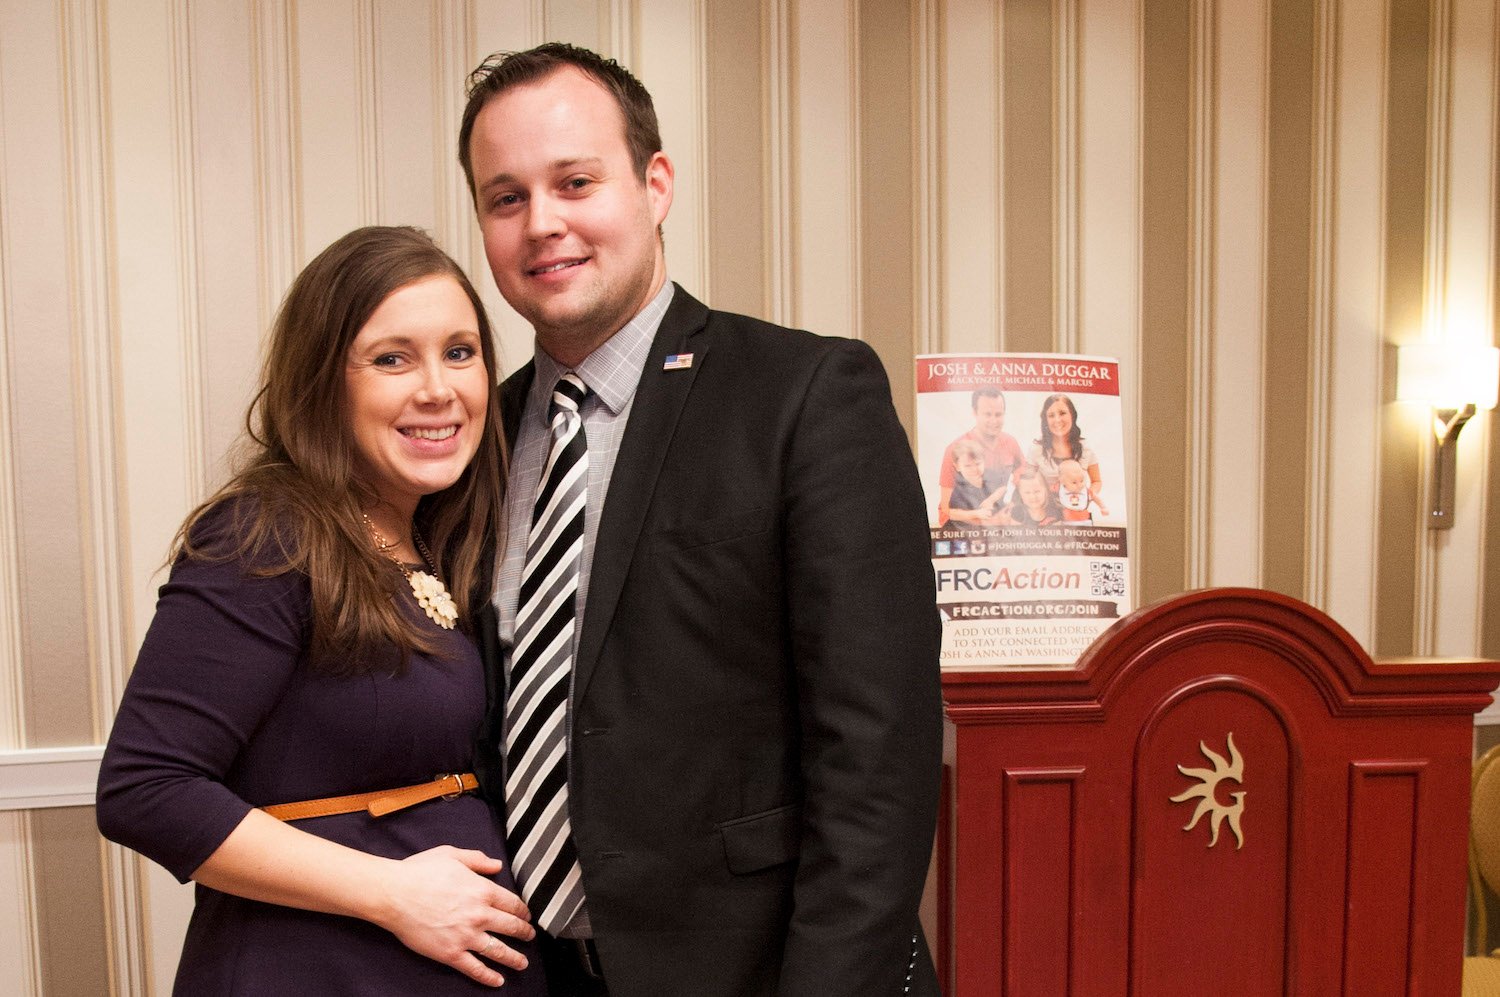 Duggar family members Anna Duggar and Josh Duggar standing next to each other and smiling